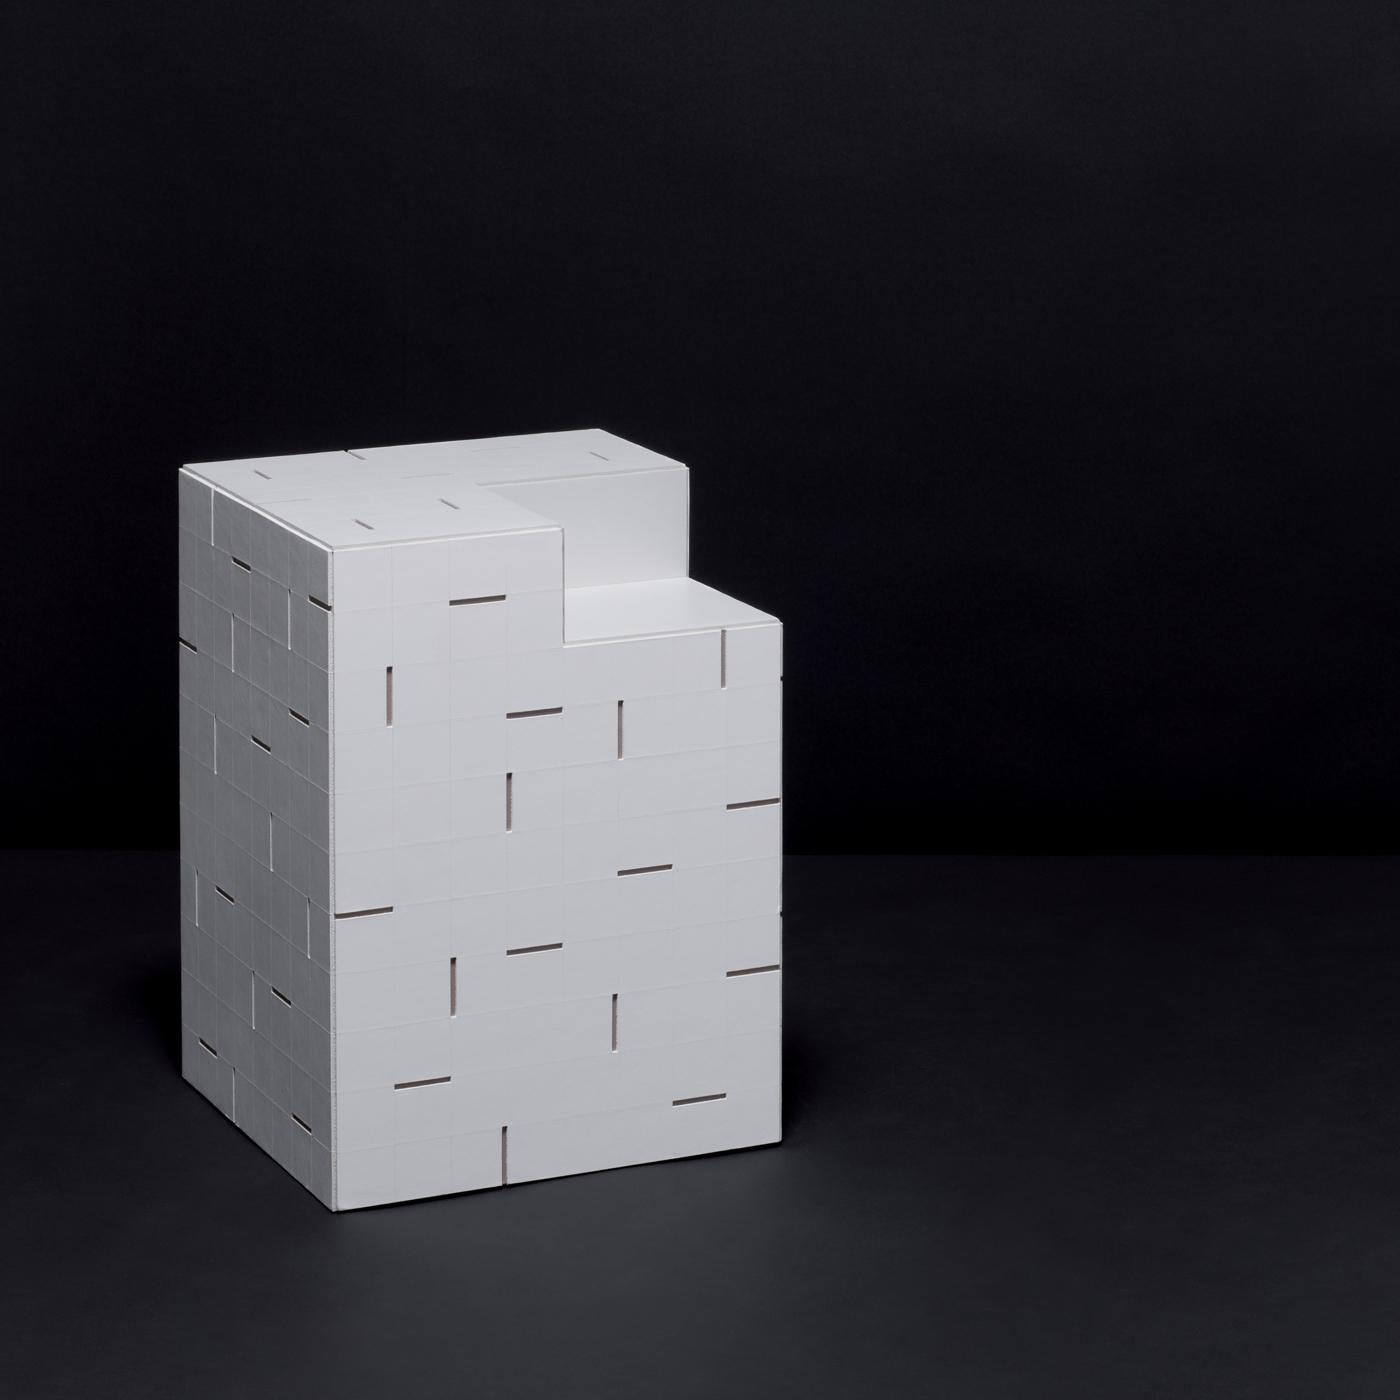 The minimal modern frame of this unique and luxurious nightstand designed by StÃ©phane Parmentier is entirely made of the finest saddle leather in arctic white with tonal stitching and interspersed black grooves. The elegant cubic silhouette has a